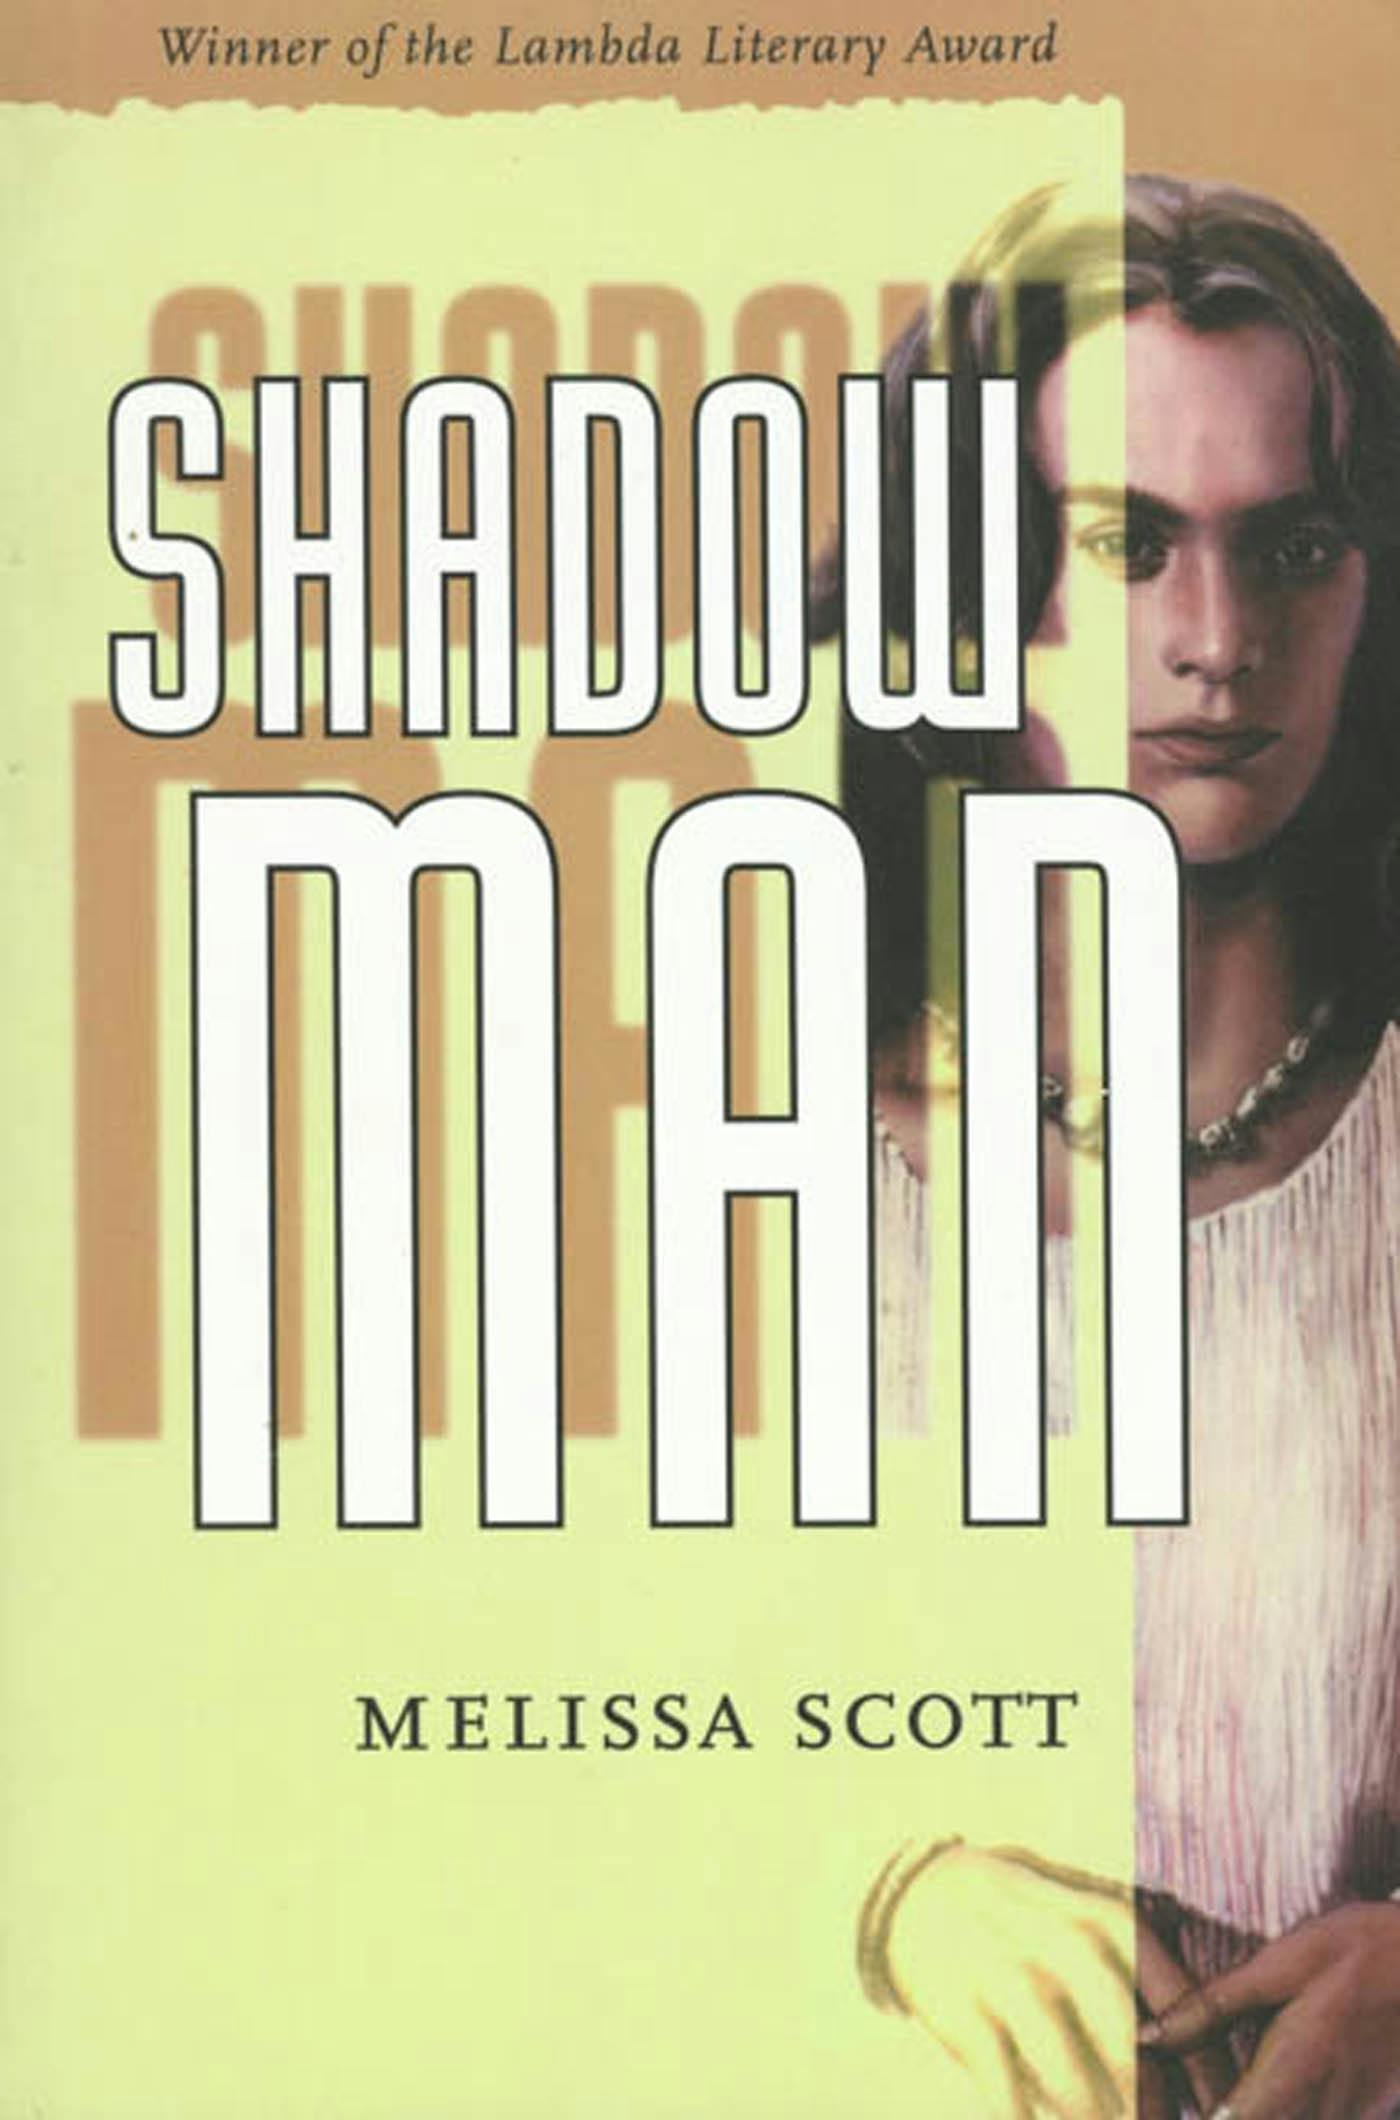 Cover for the book titled as: Shadow Man